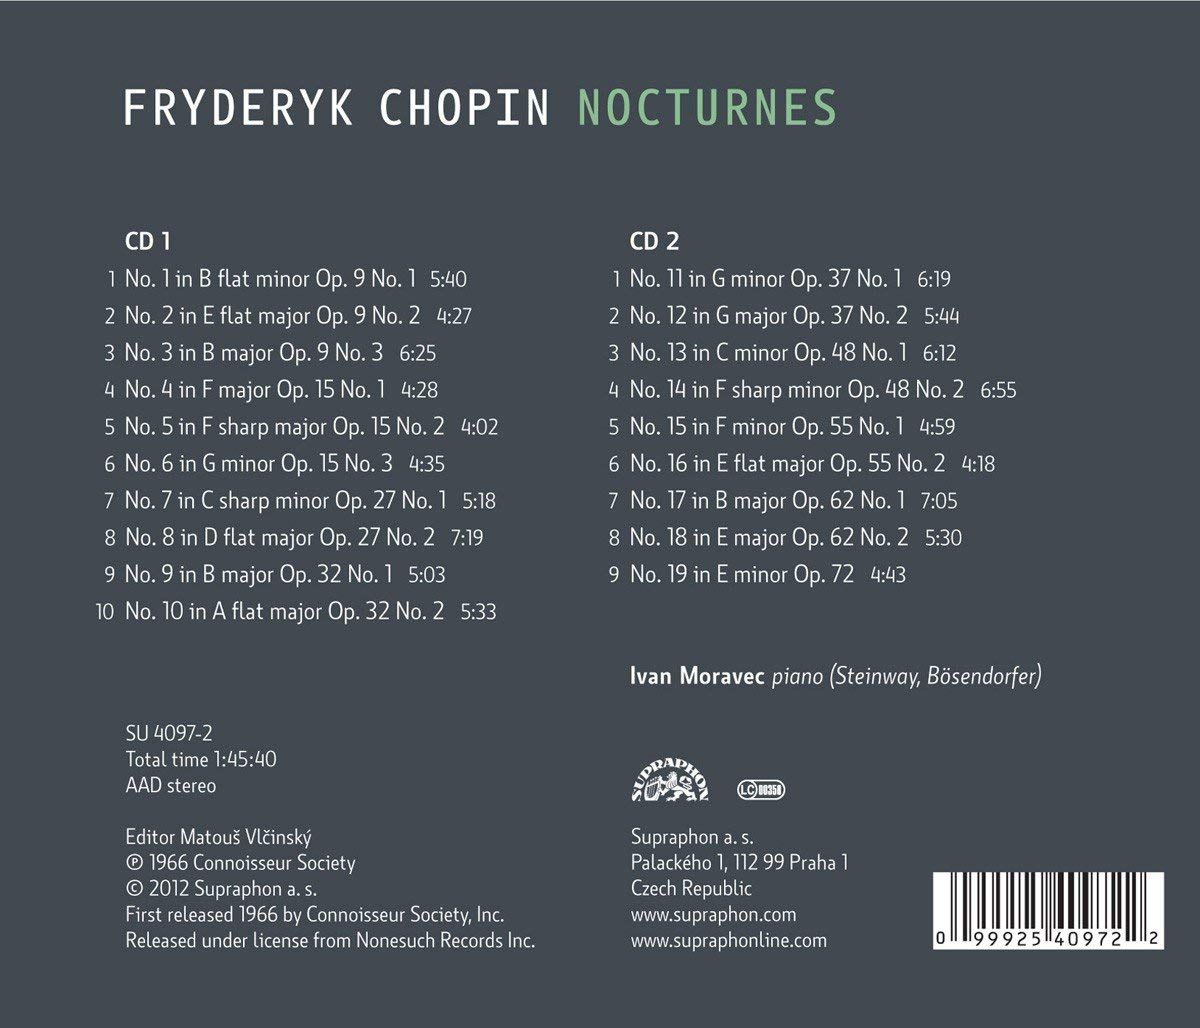 Chopin: Nocturnes Opp. 9, 15, 27, 32, 37, 48, 55, 62 and 72 - slide-1